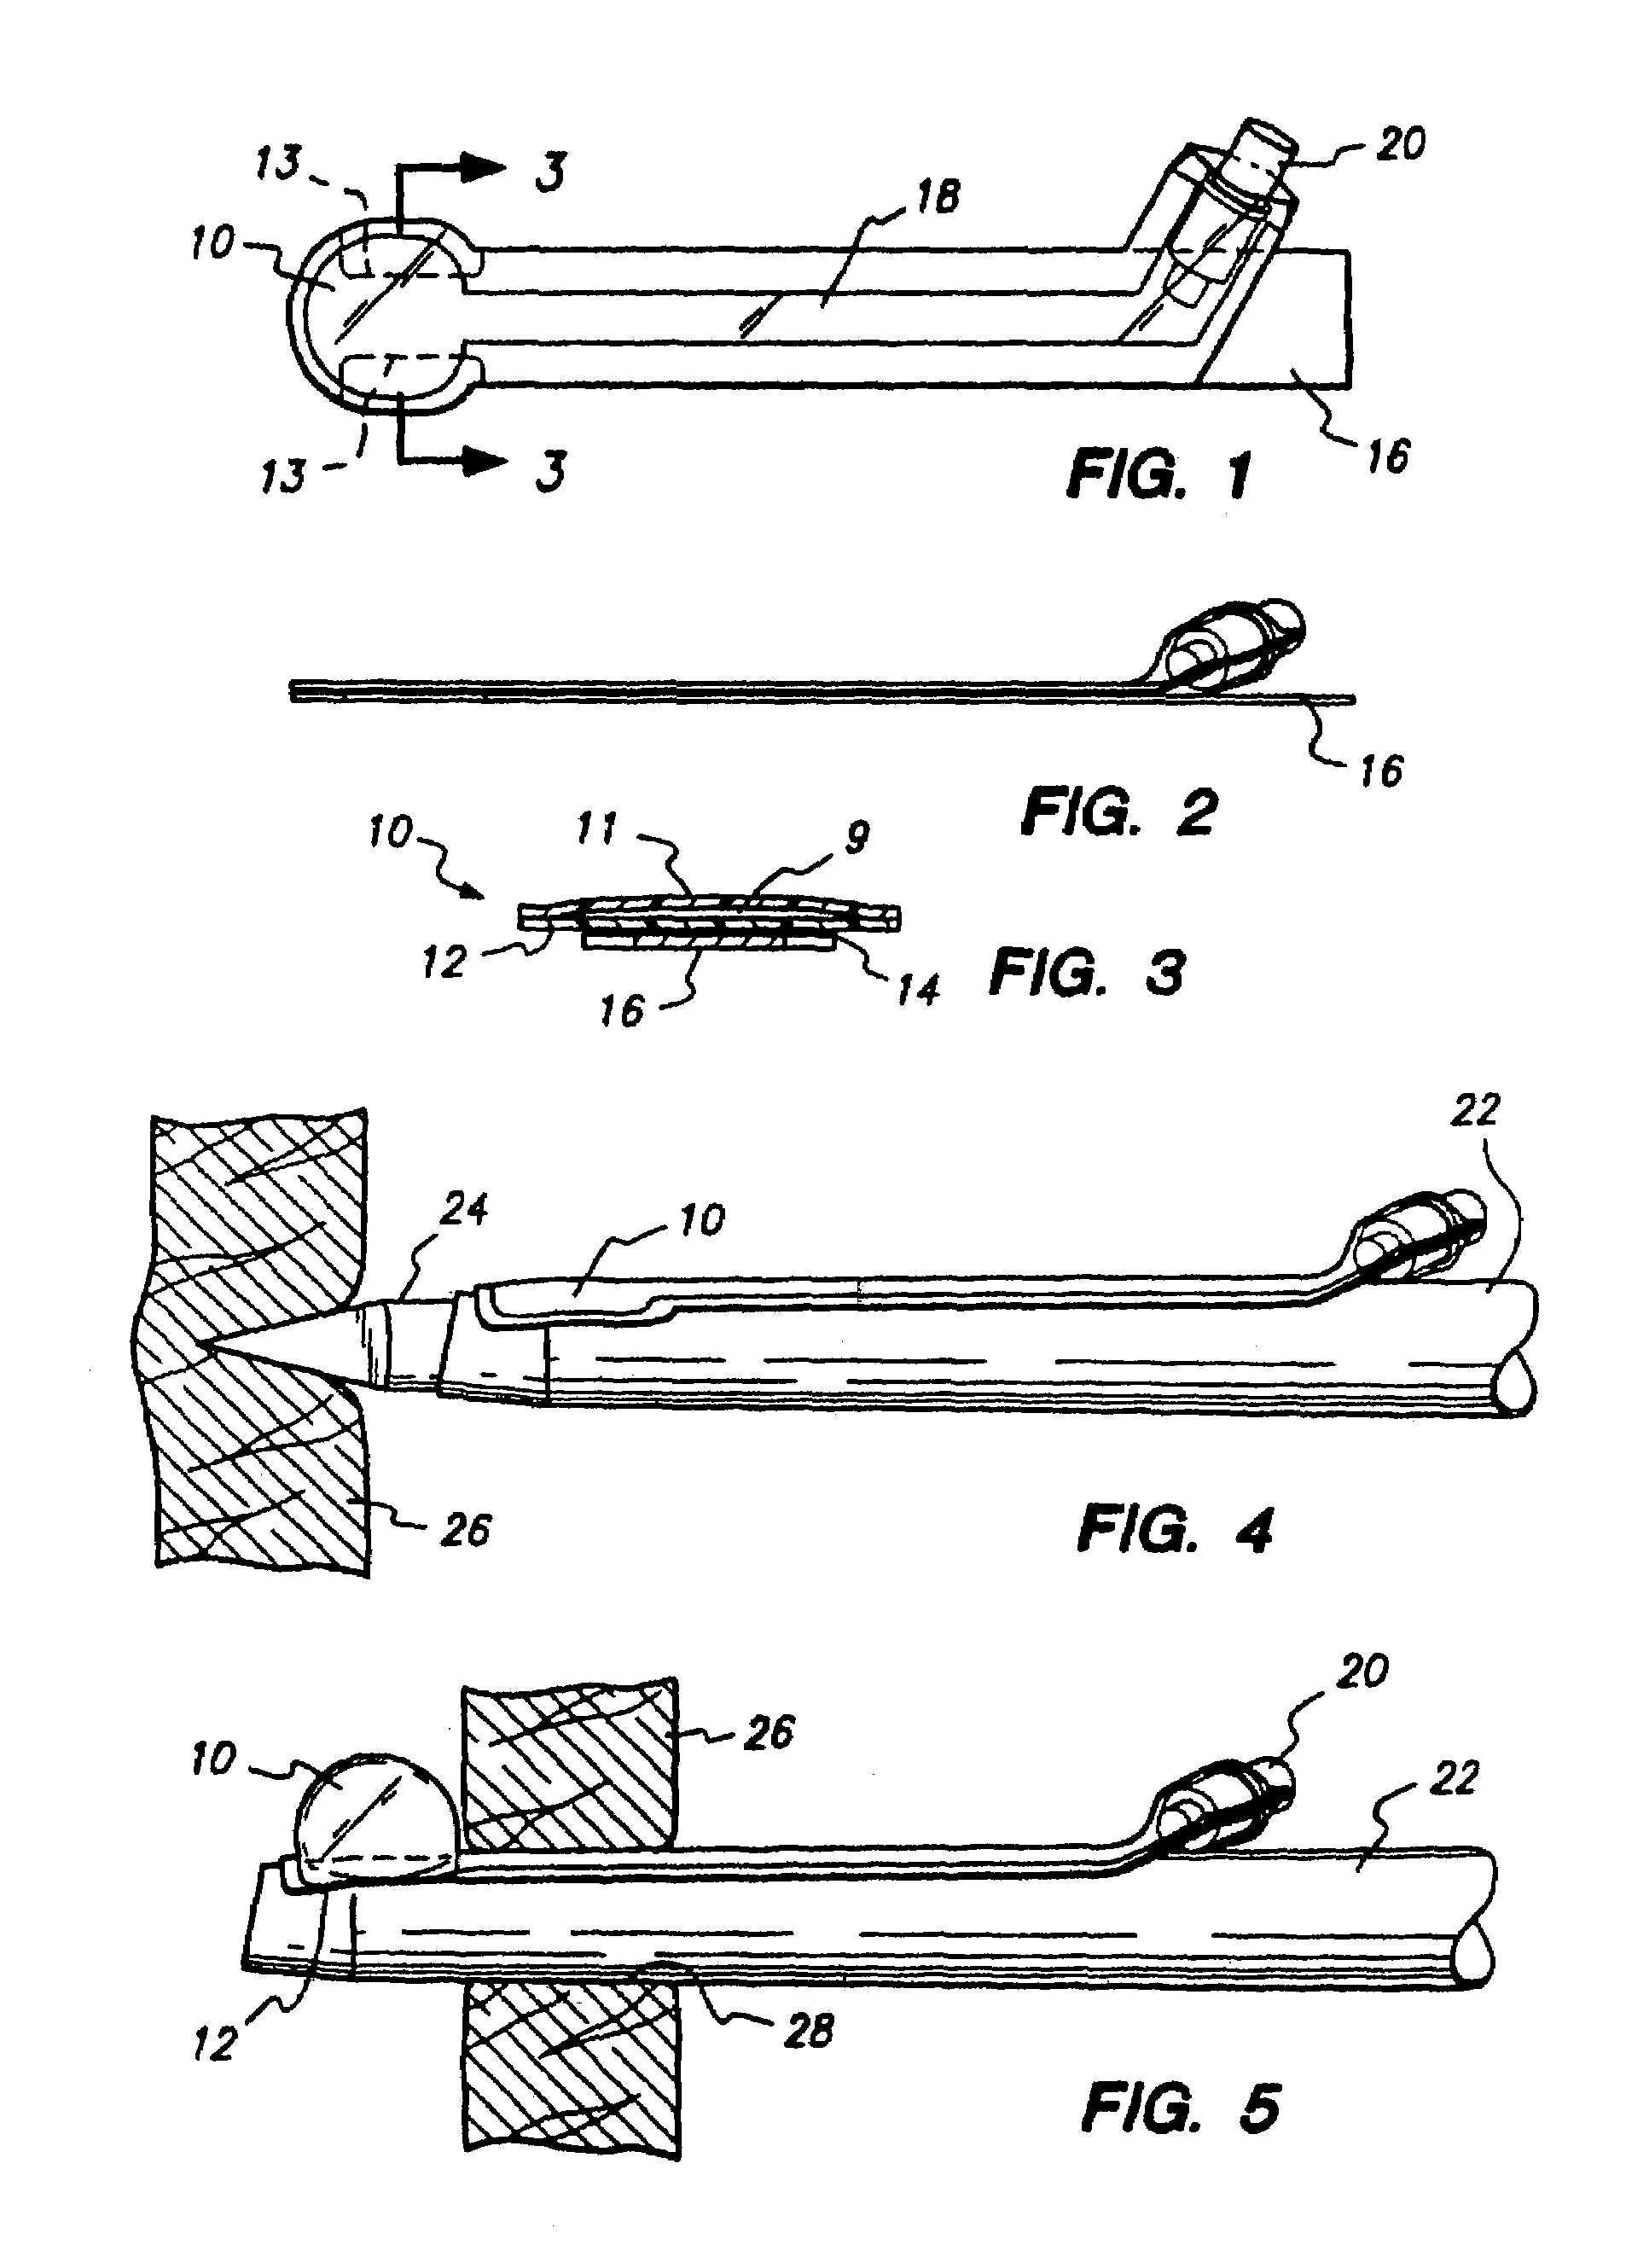 Method and apparatus for anchoring laparoscopic instruments